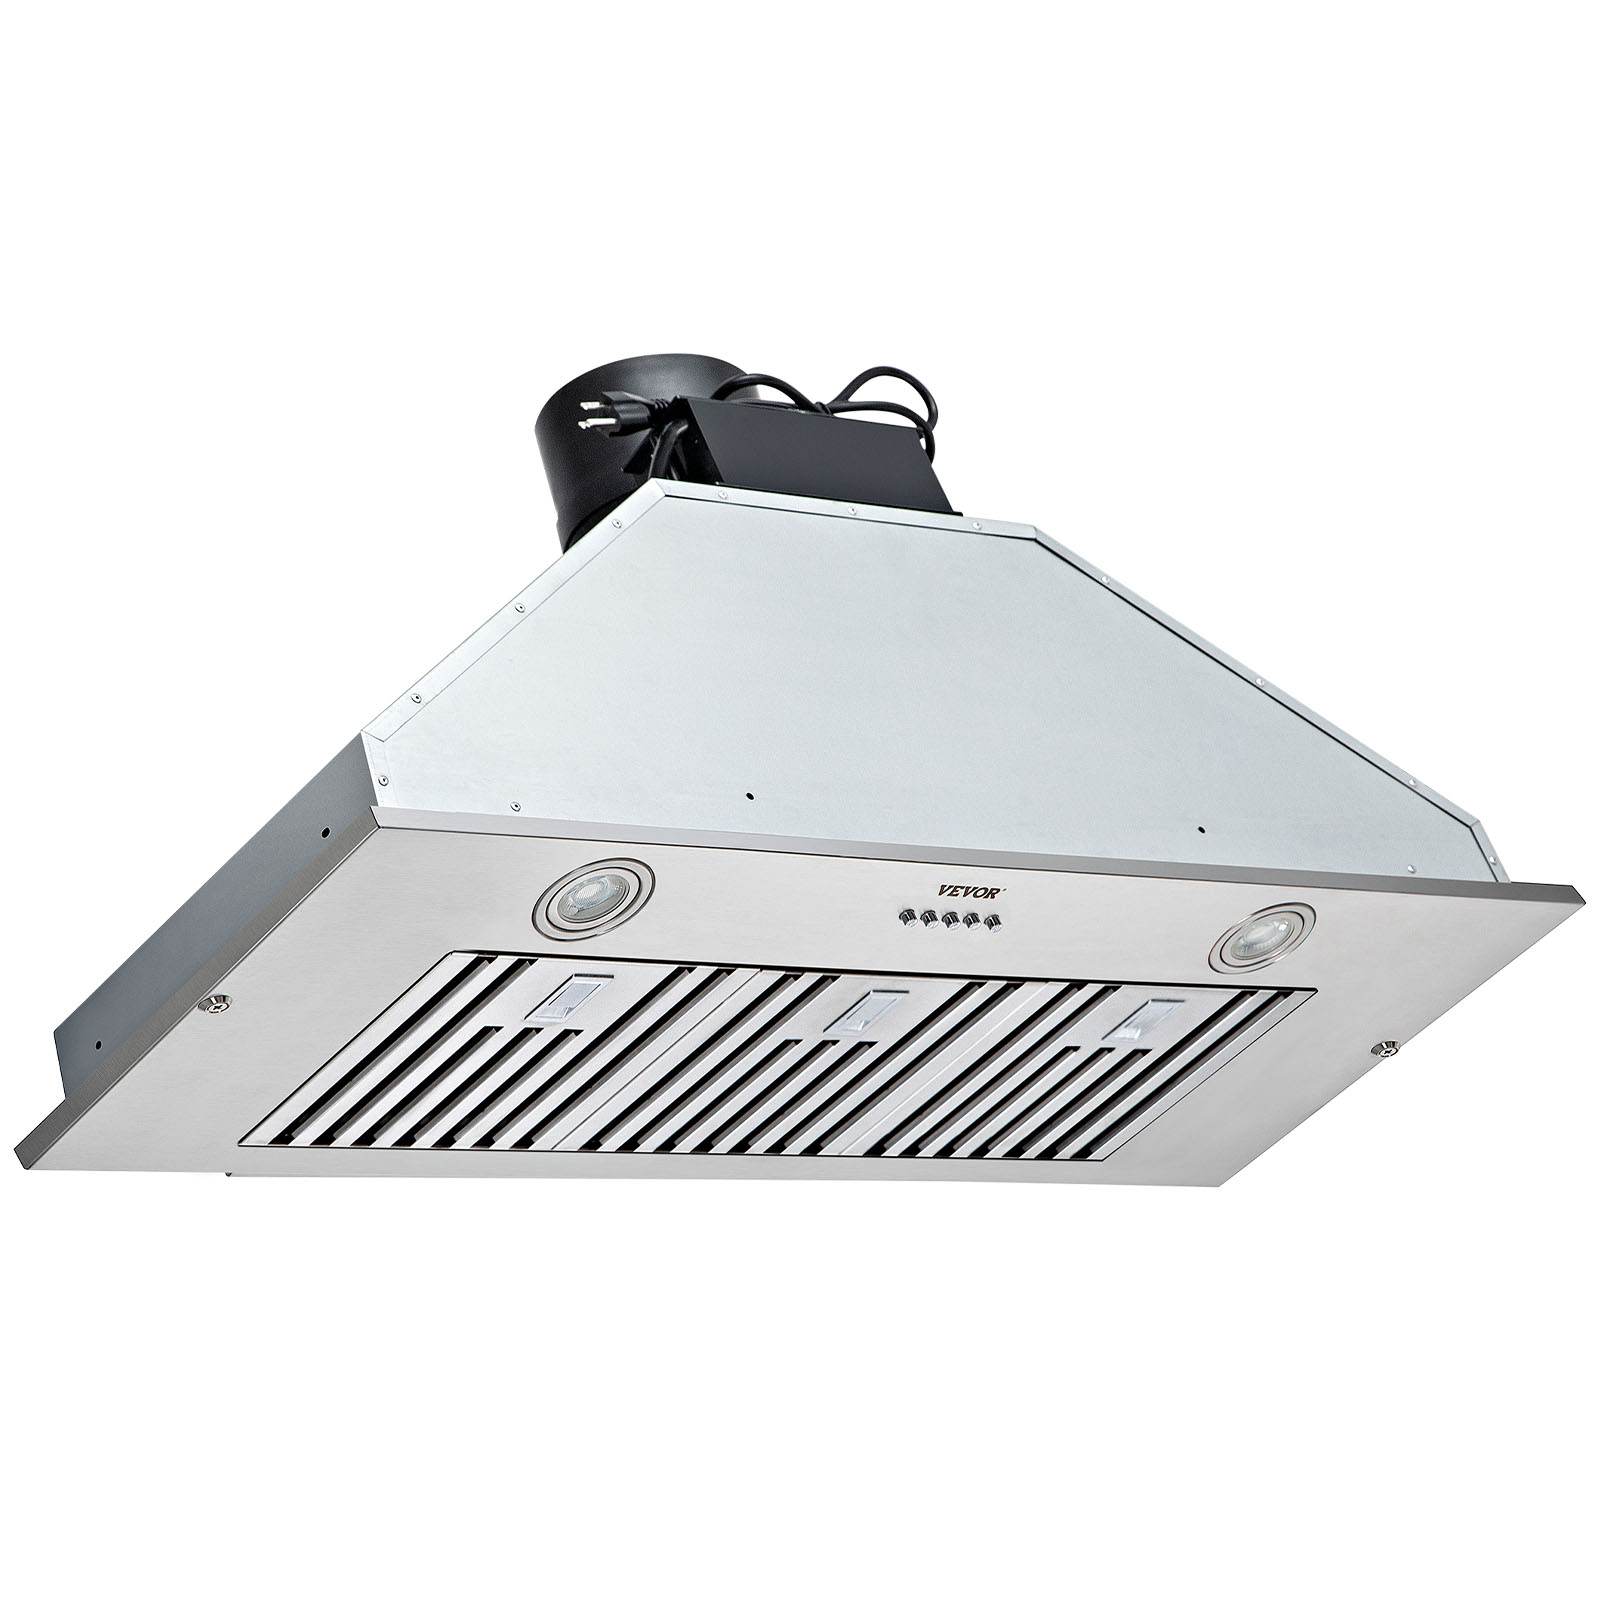 Built-in Range Hood,Max 900CFM,Touch & Remote Control